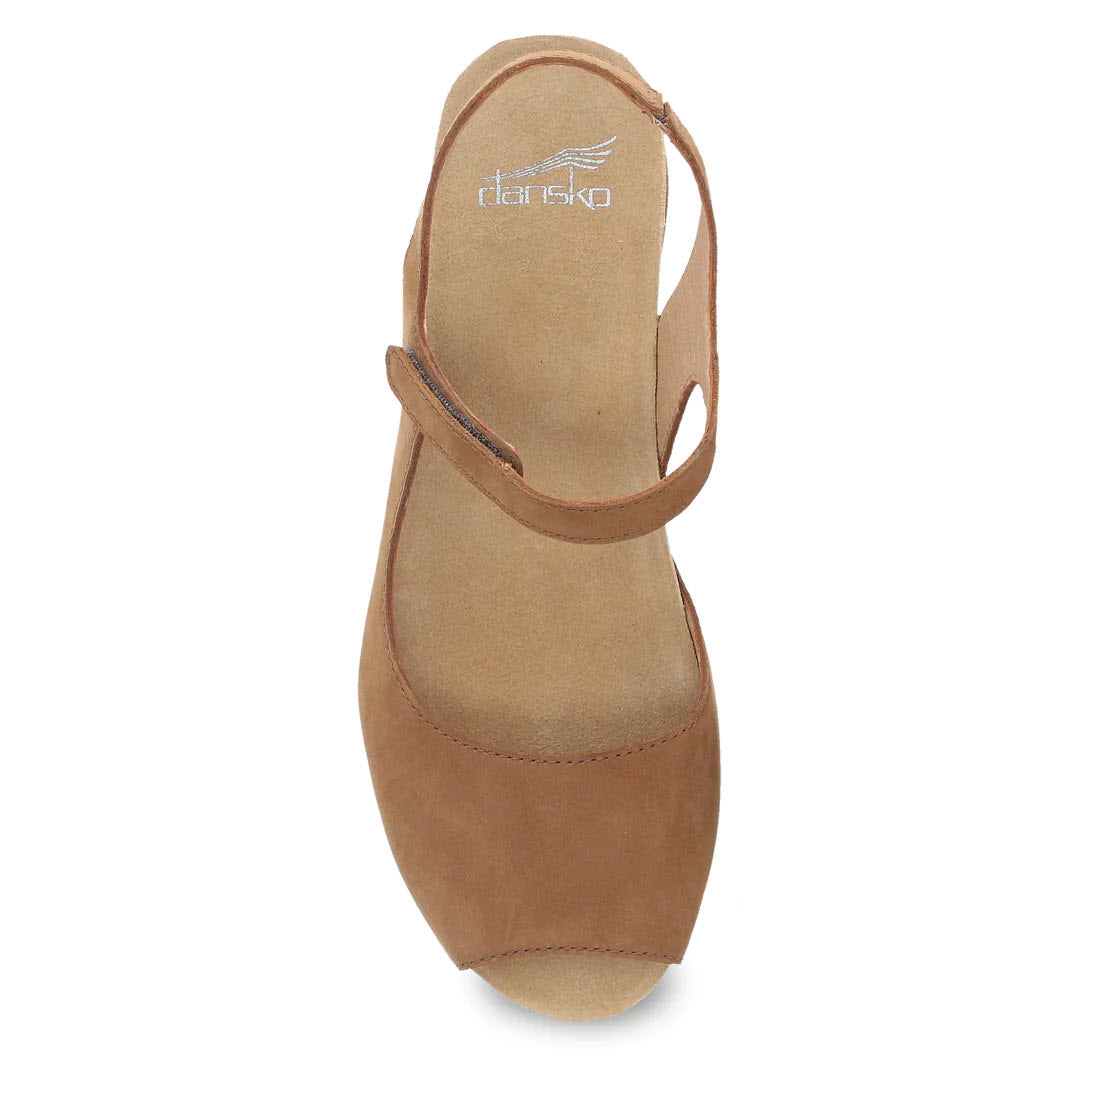 Top view of a single brown suede Dansko Marcy Wedge sandal with a t-strap design on a white background.